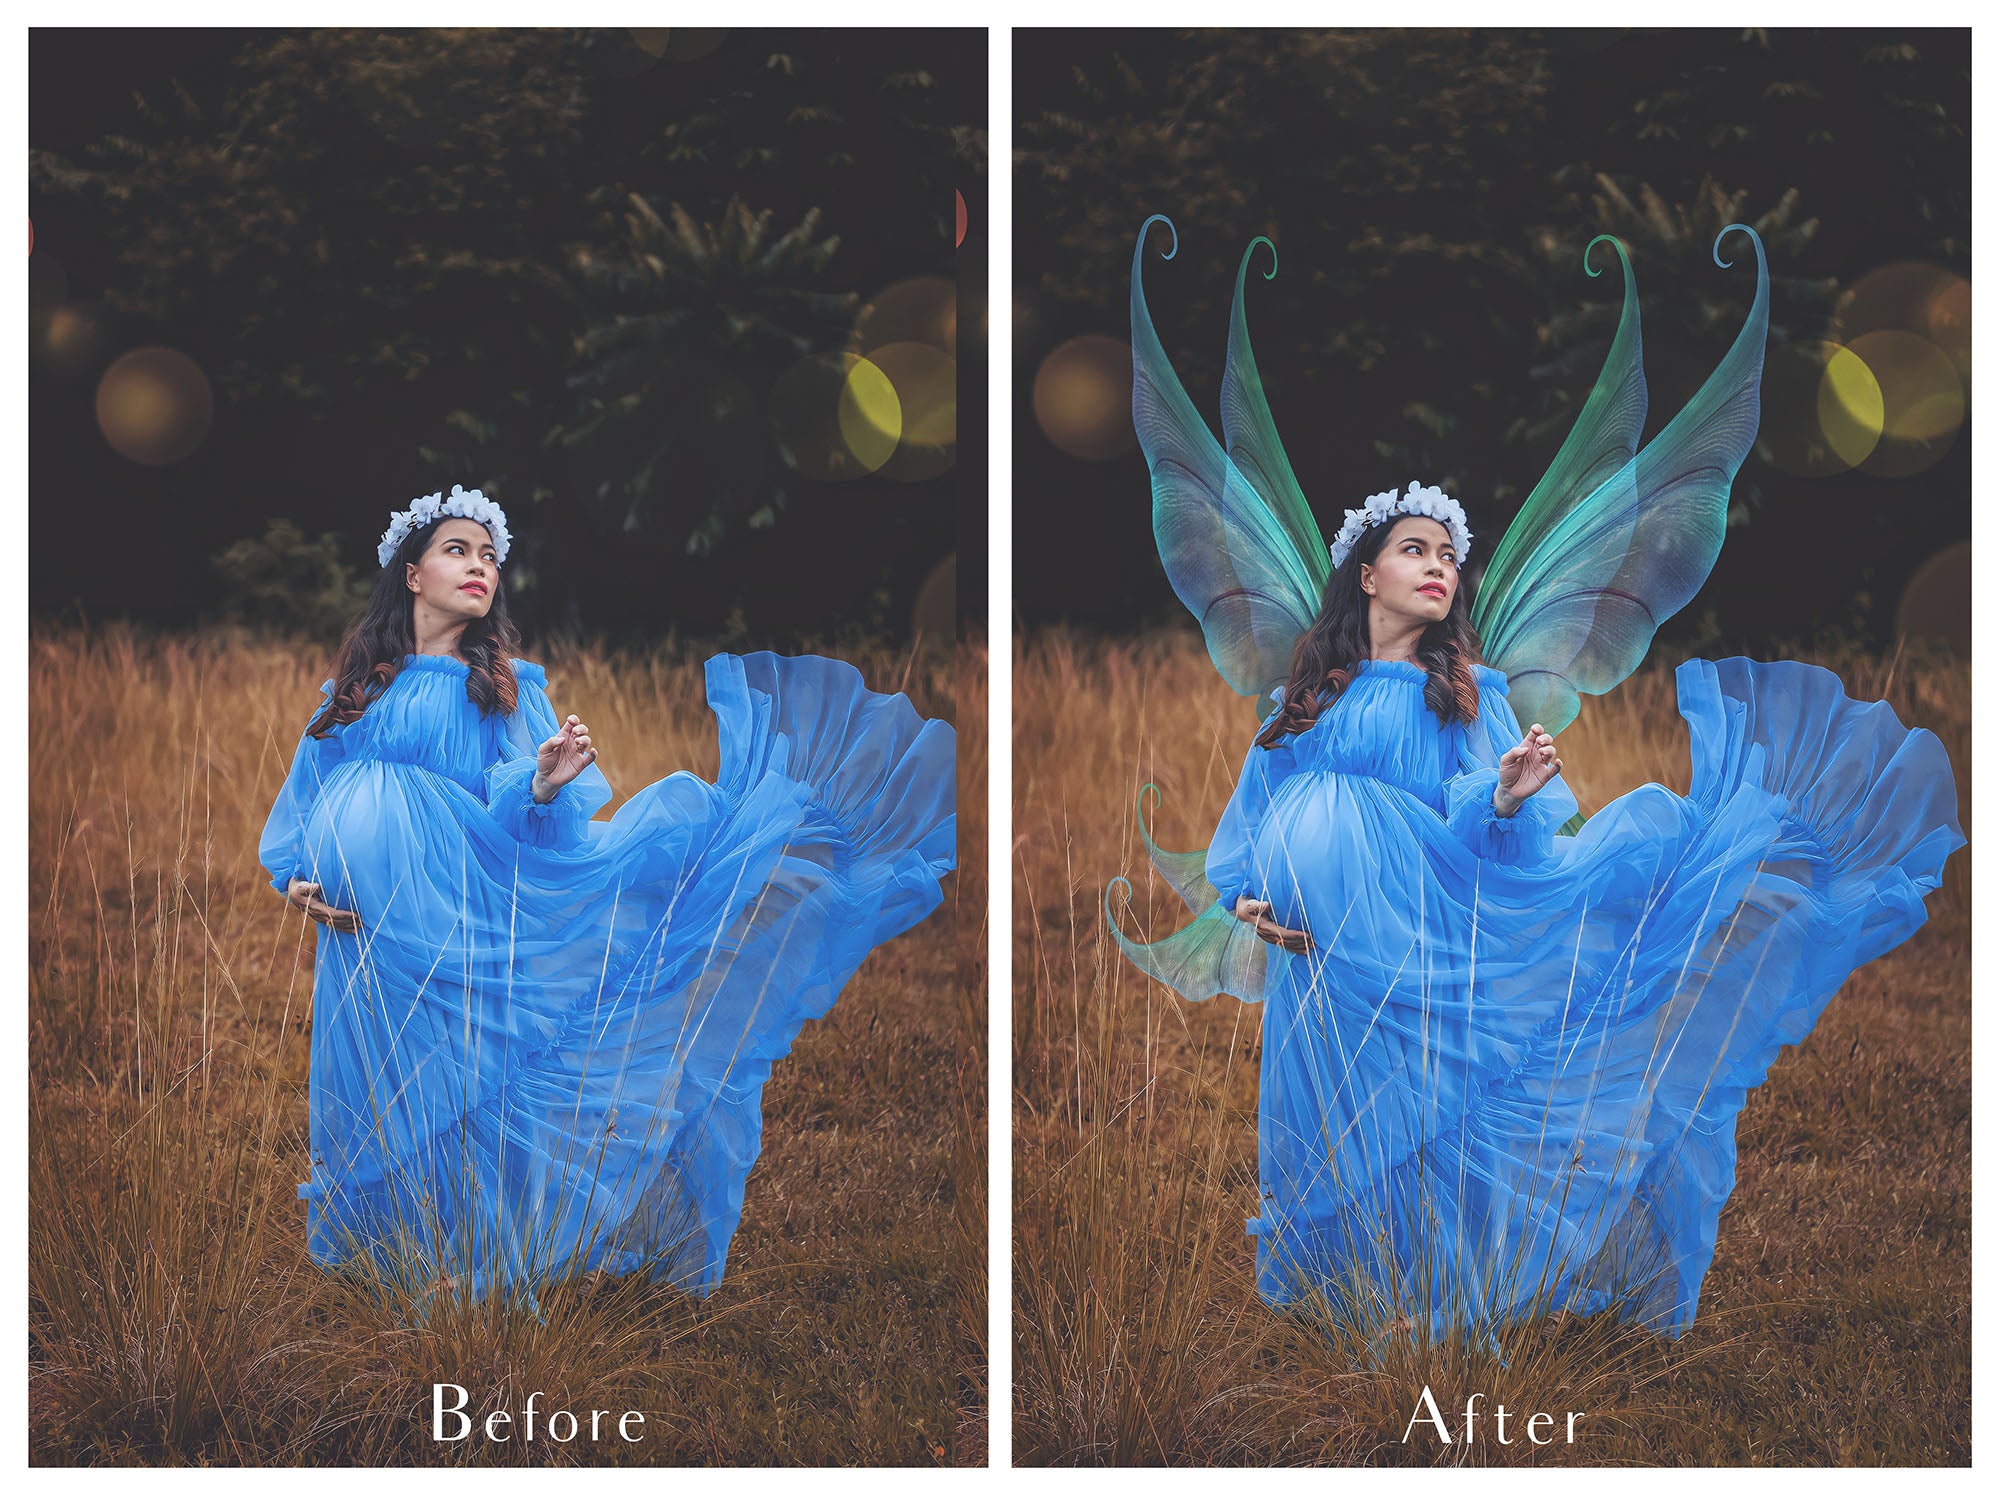 Fairy wings, Png overlays for photoshop. Photography editing. High resolution, 300dpi fairy wings. Overlays for photography. Digital stock and resources. Graphic design. Fairy Photos. Colourful Fairy wings. Faerie Wings.